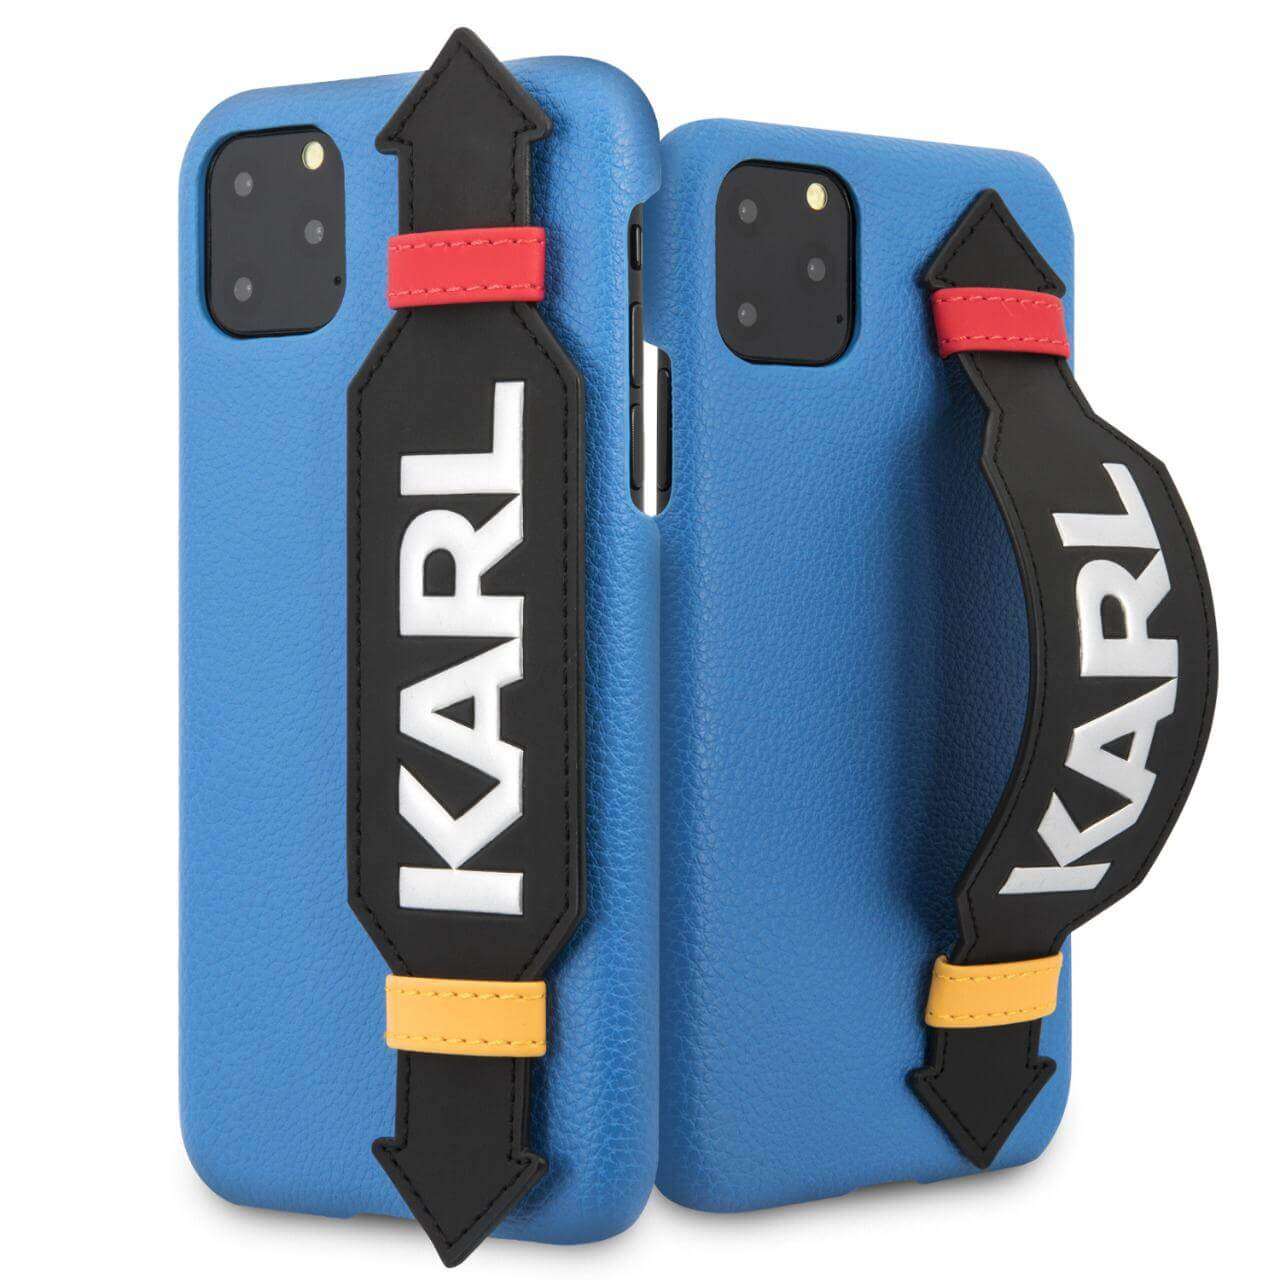 Karl Lagerfeld PU Hard Case with Strap For iPhone 11 Pro Max - Blue